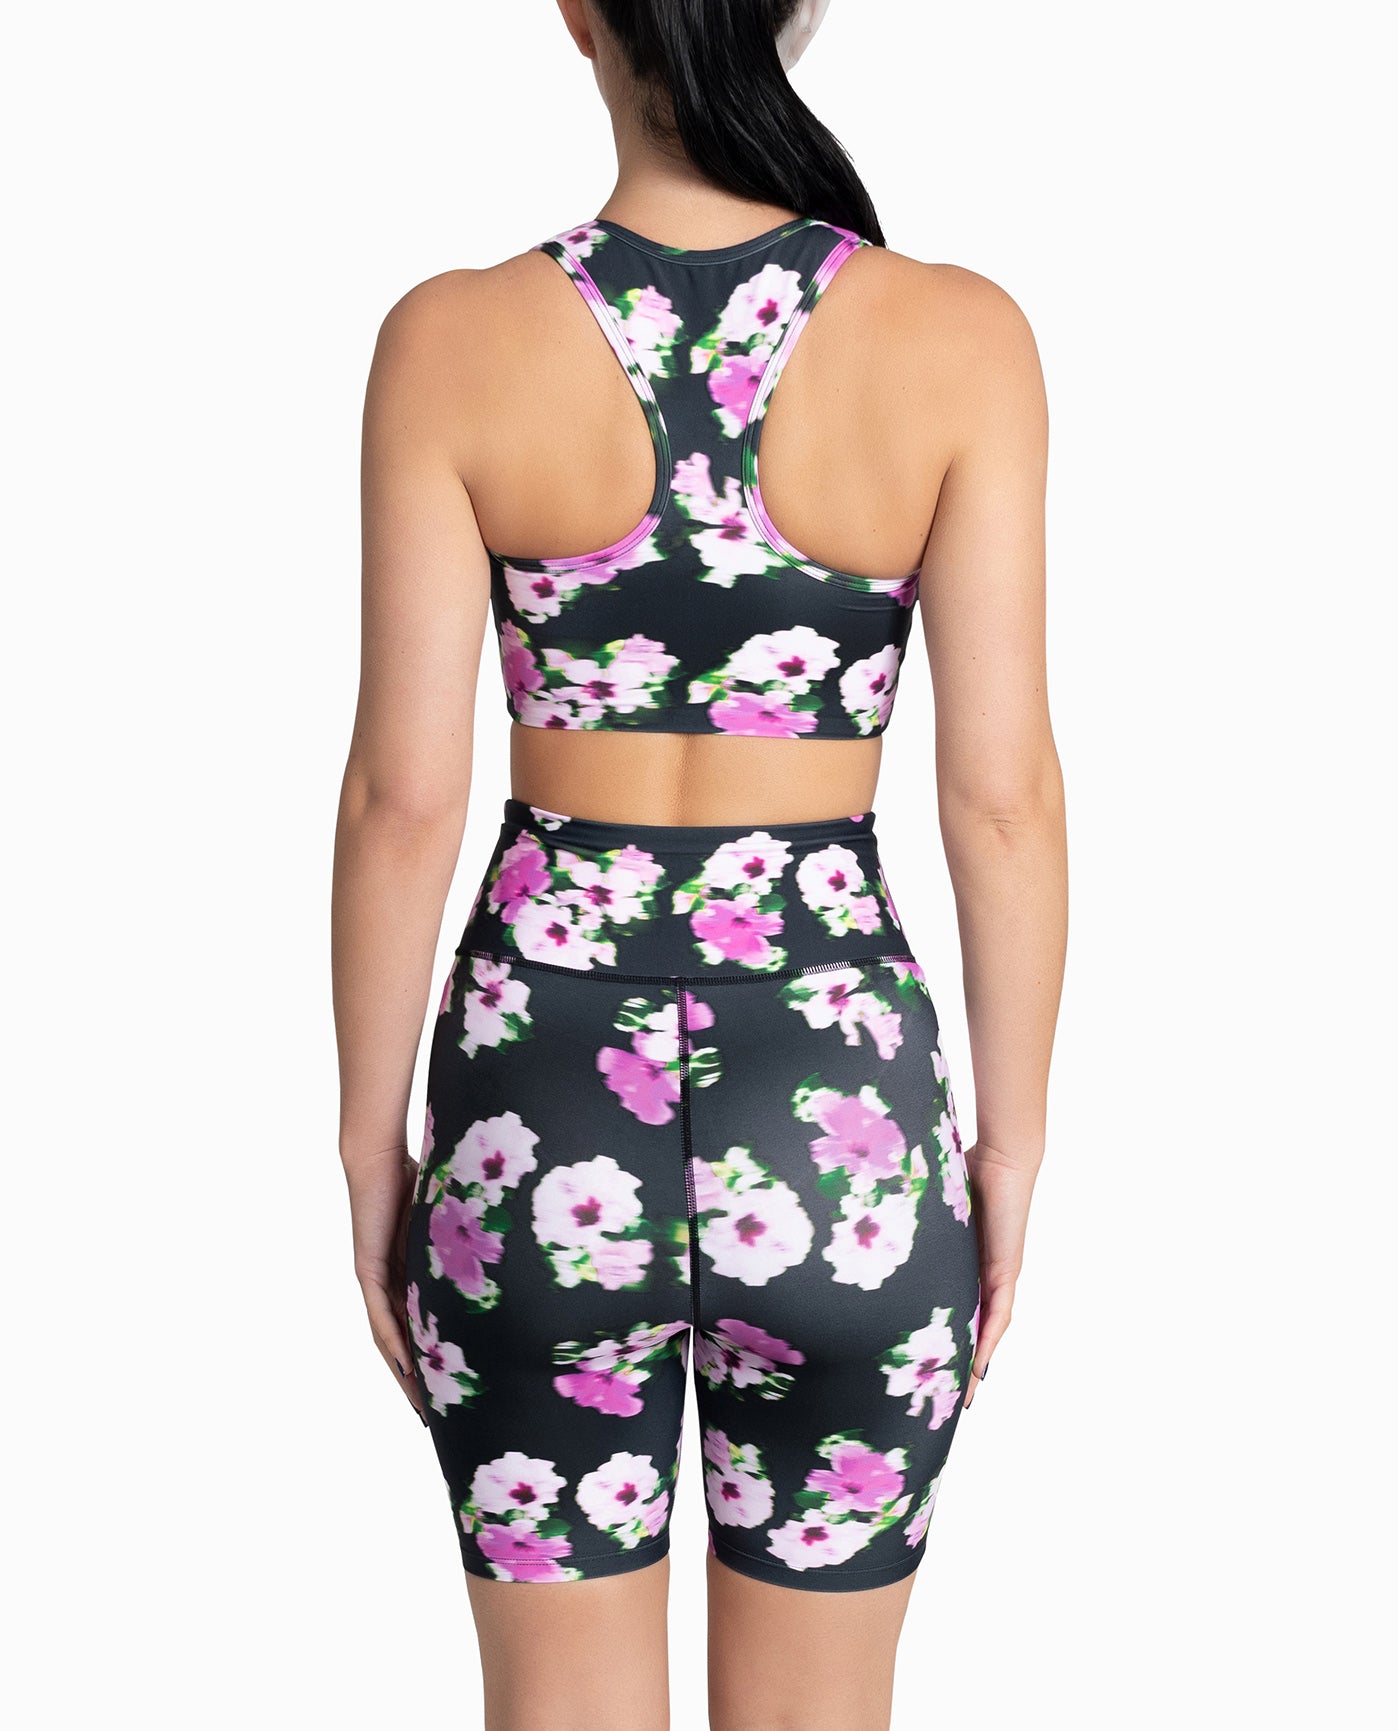 BACK OF CUT OUT RACERBACK SPORTS BRA | Pink and Black Floral